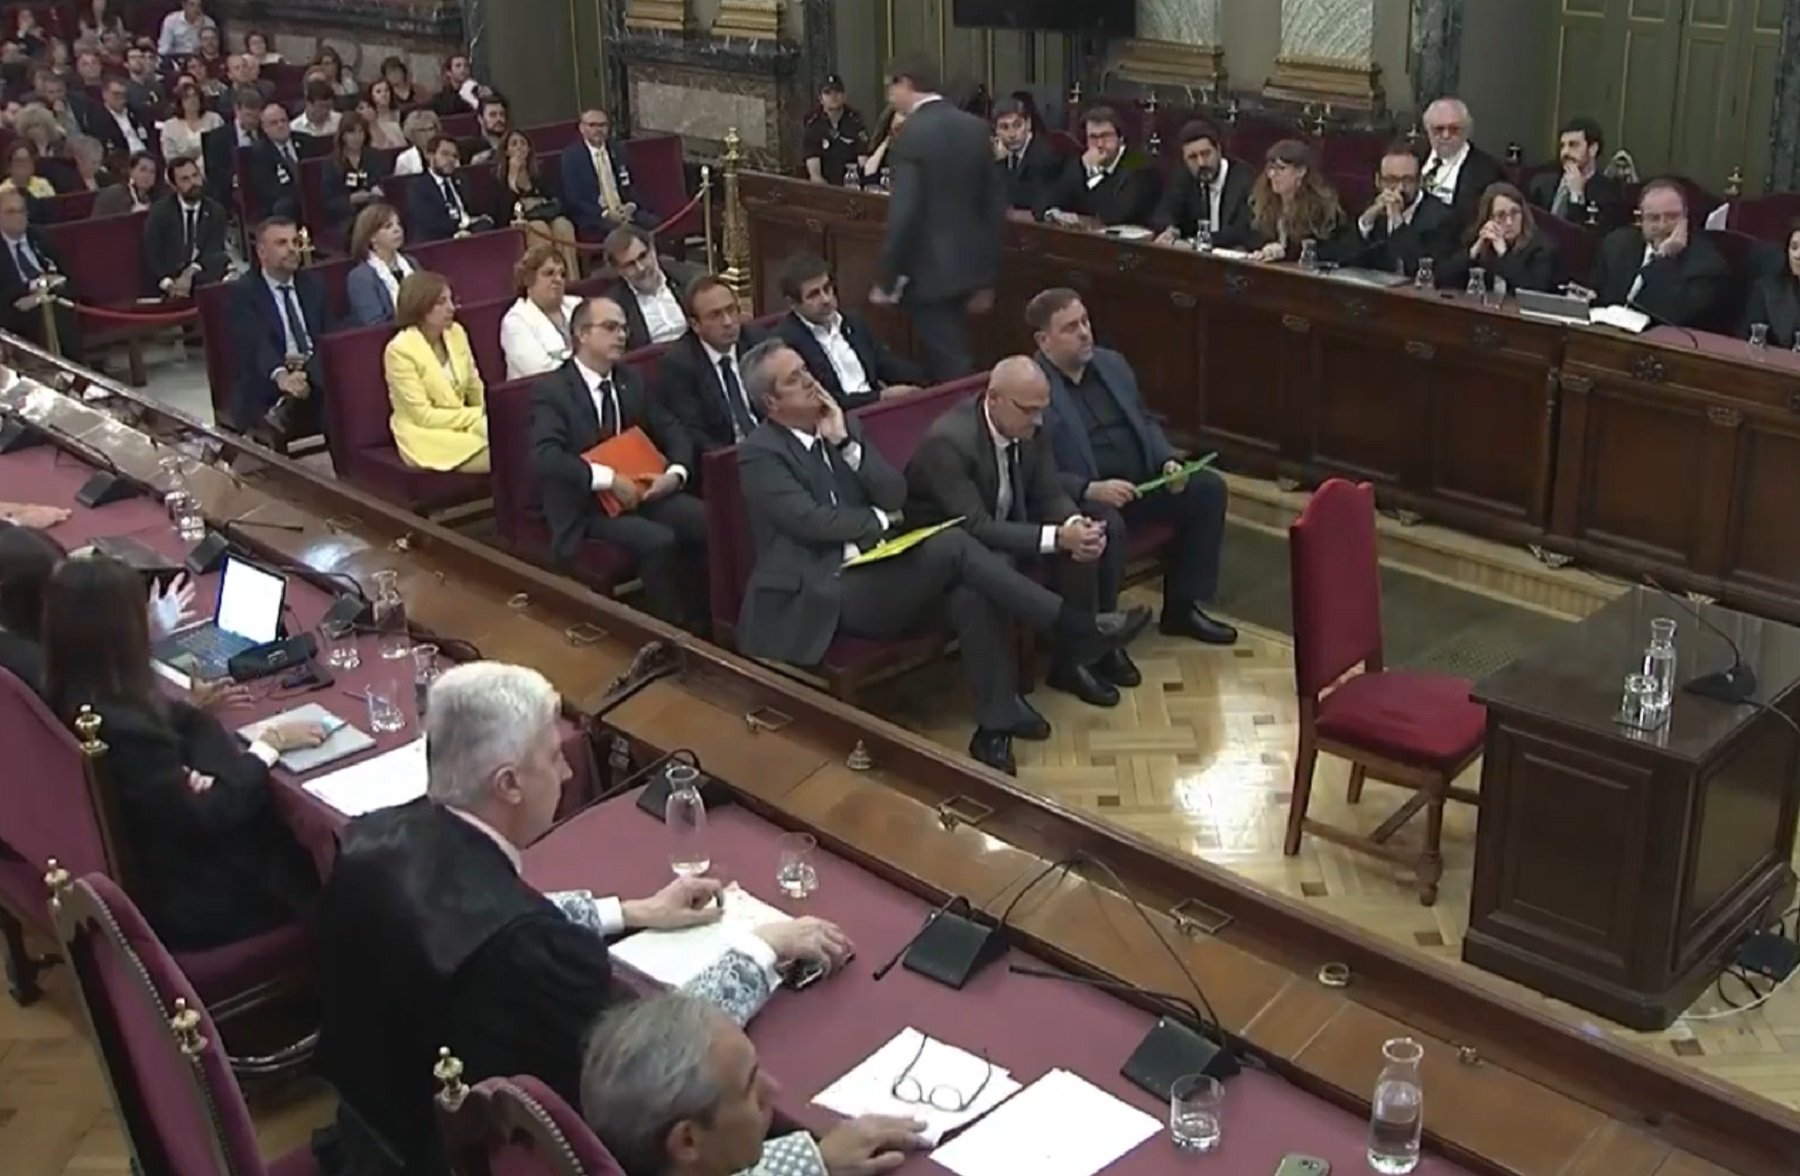 The Catalan independence trial, over until judges decide on their sentences